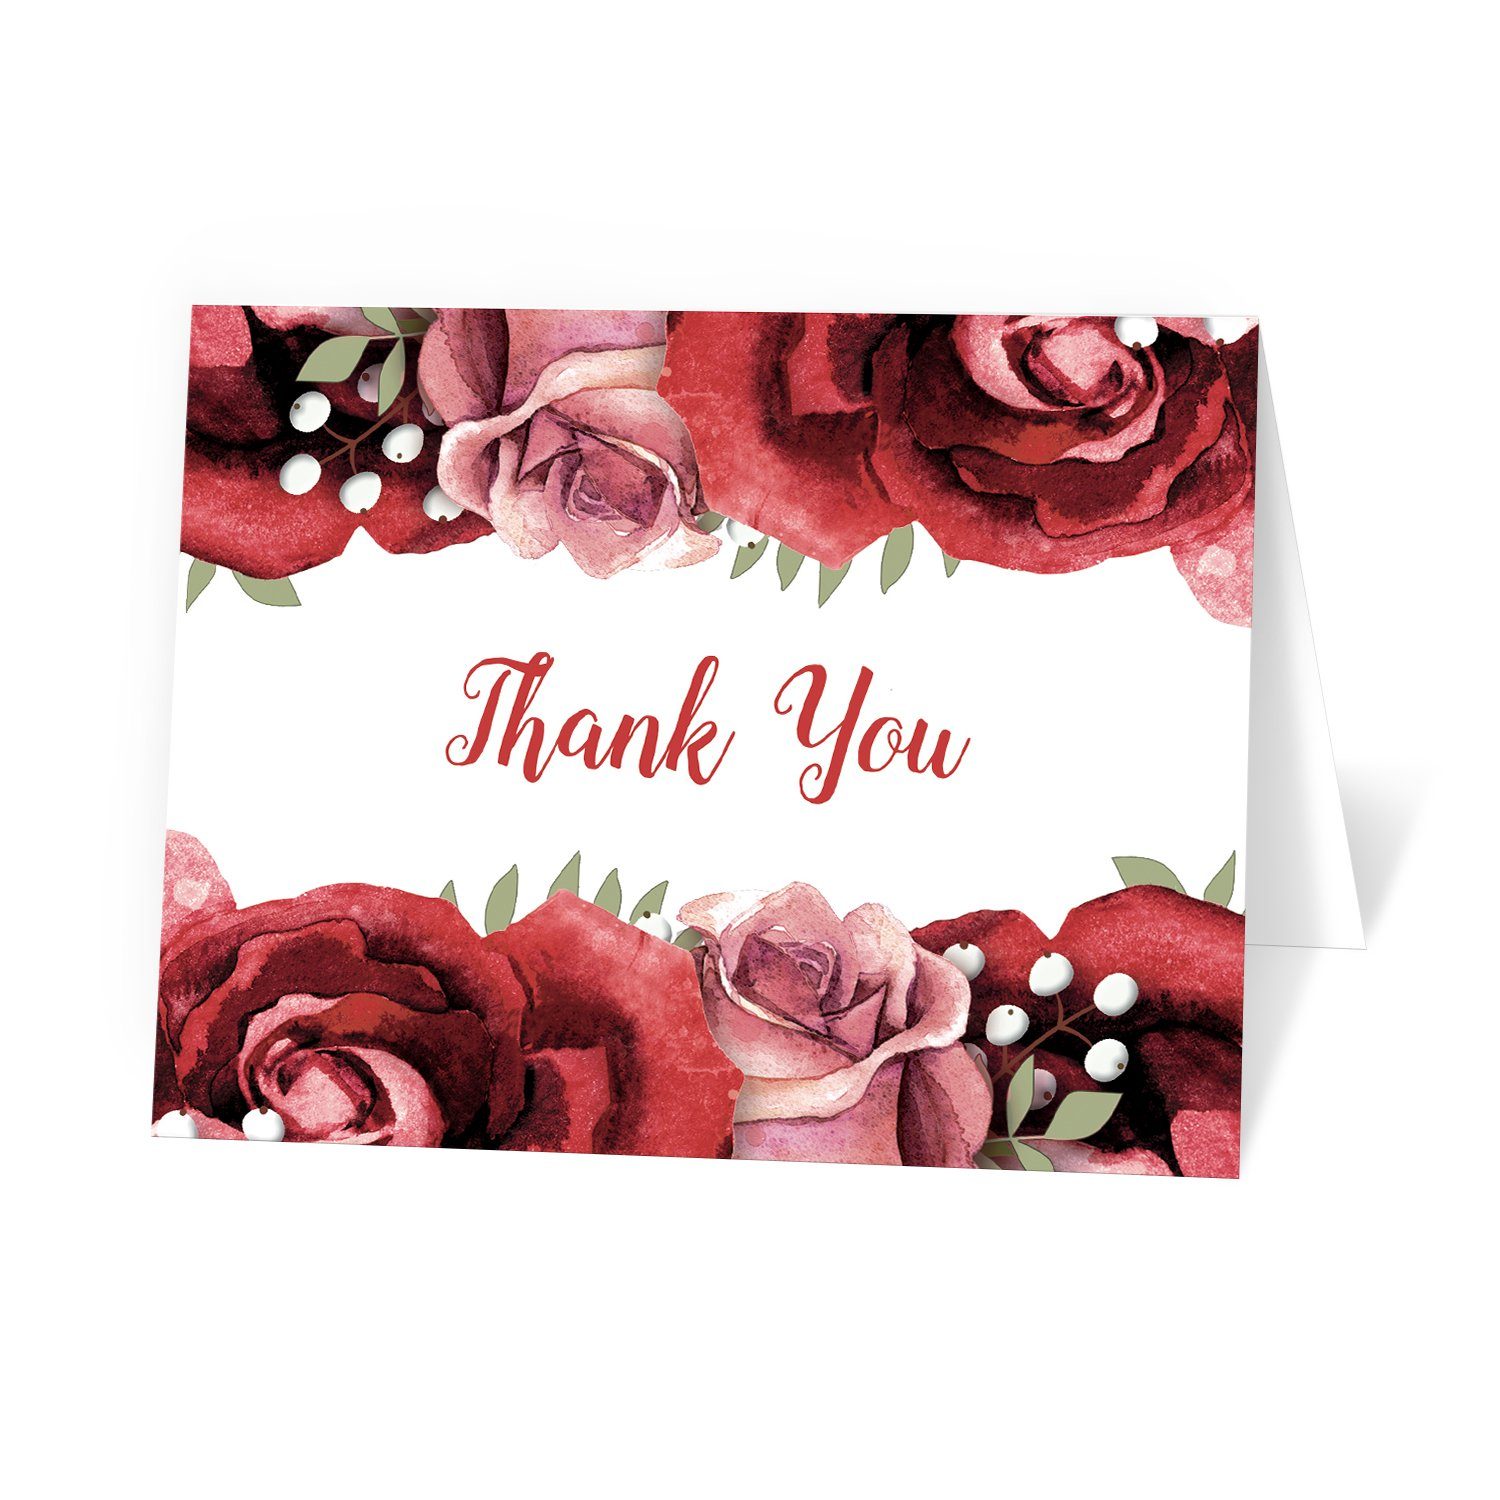 Rustic Red Pink Rose Green White Thank You Cards at Artistically Invited